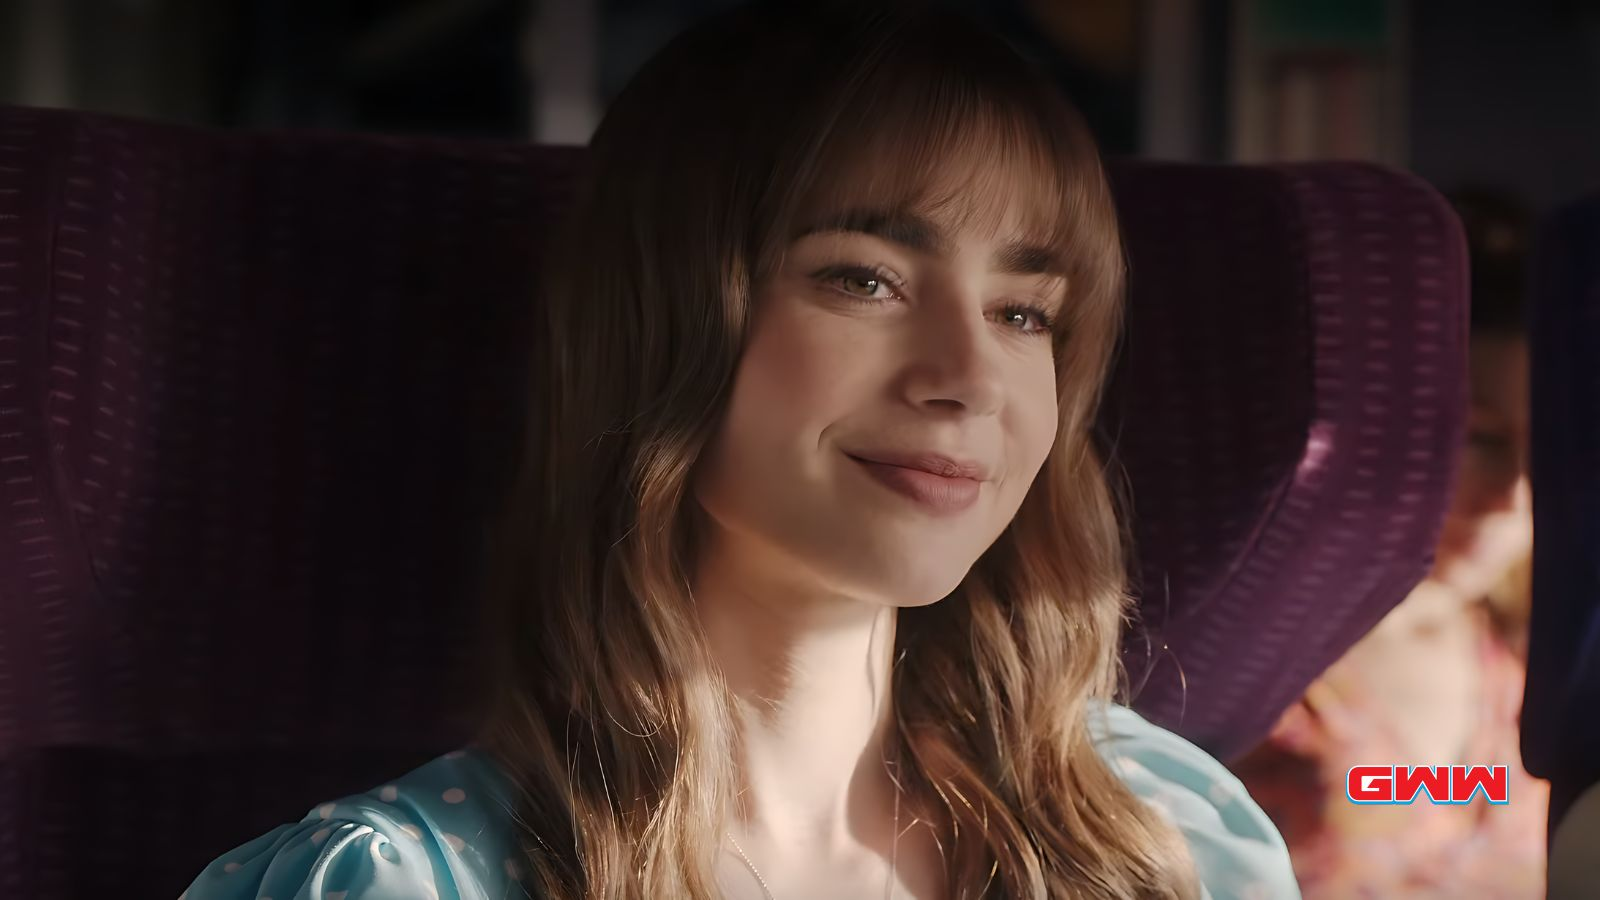 Emily smiling while sitting on a train with a purple seat.